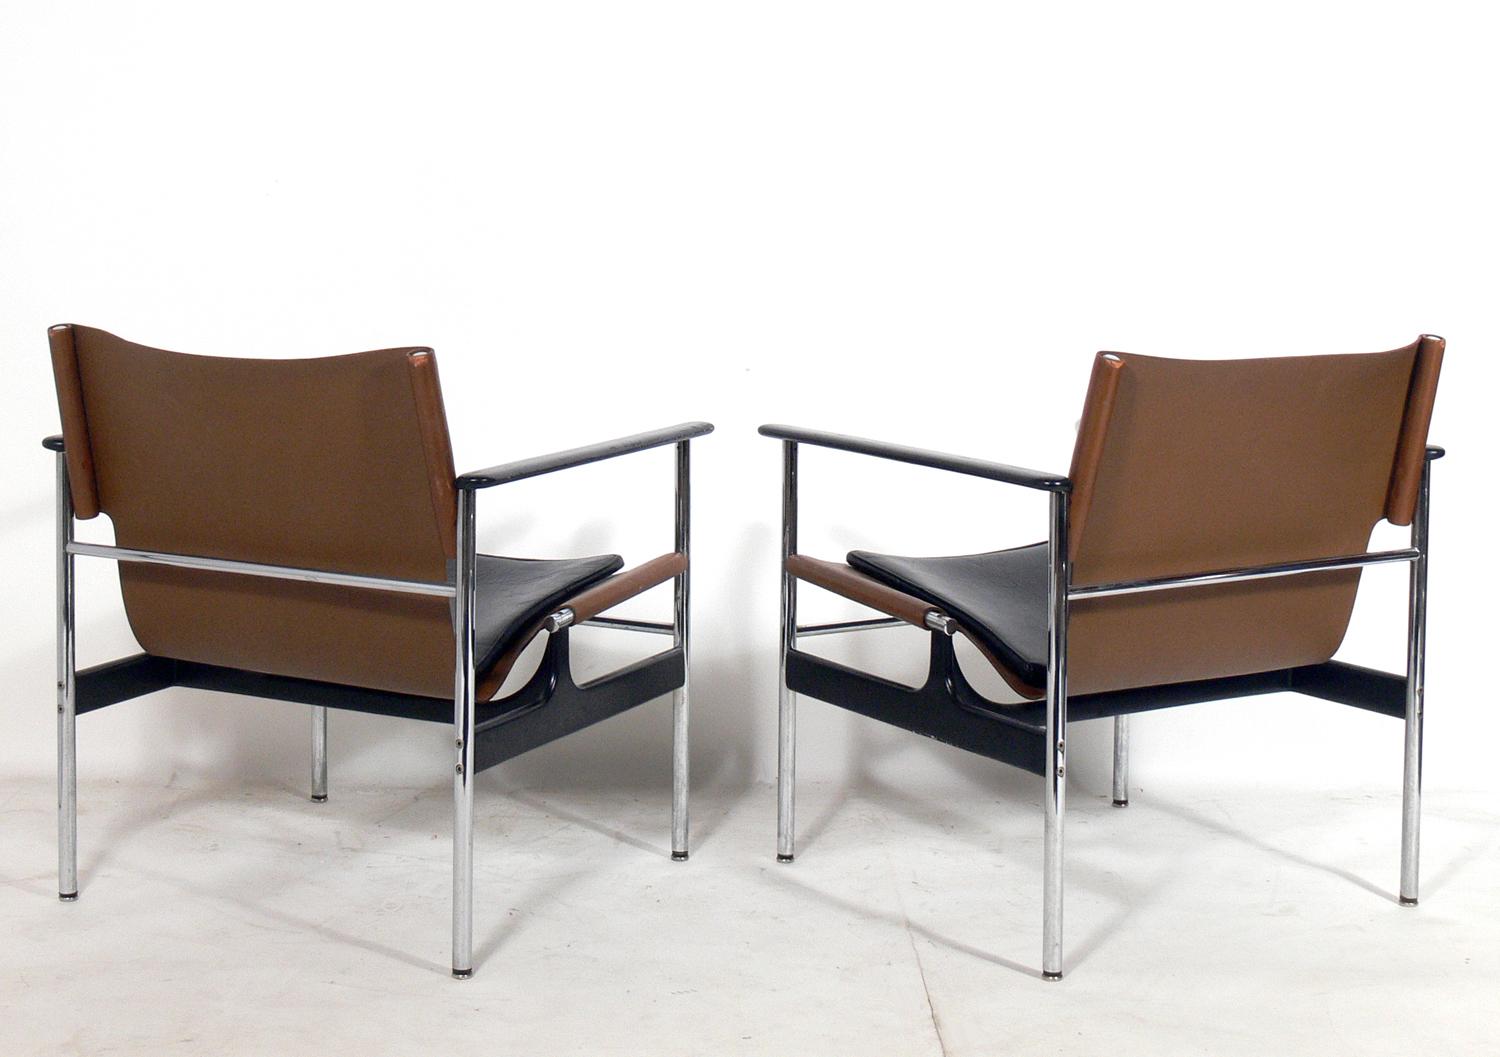 American Pair of Leather Sling Lounge Chairs by Charles Pollock for Knoll